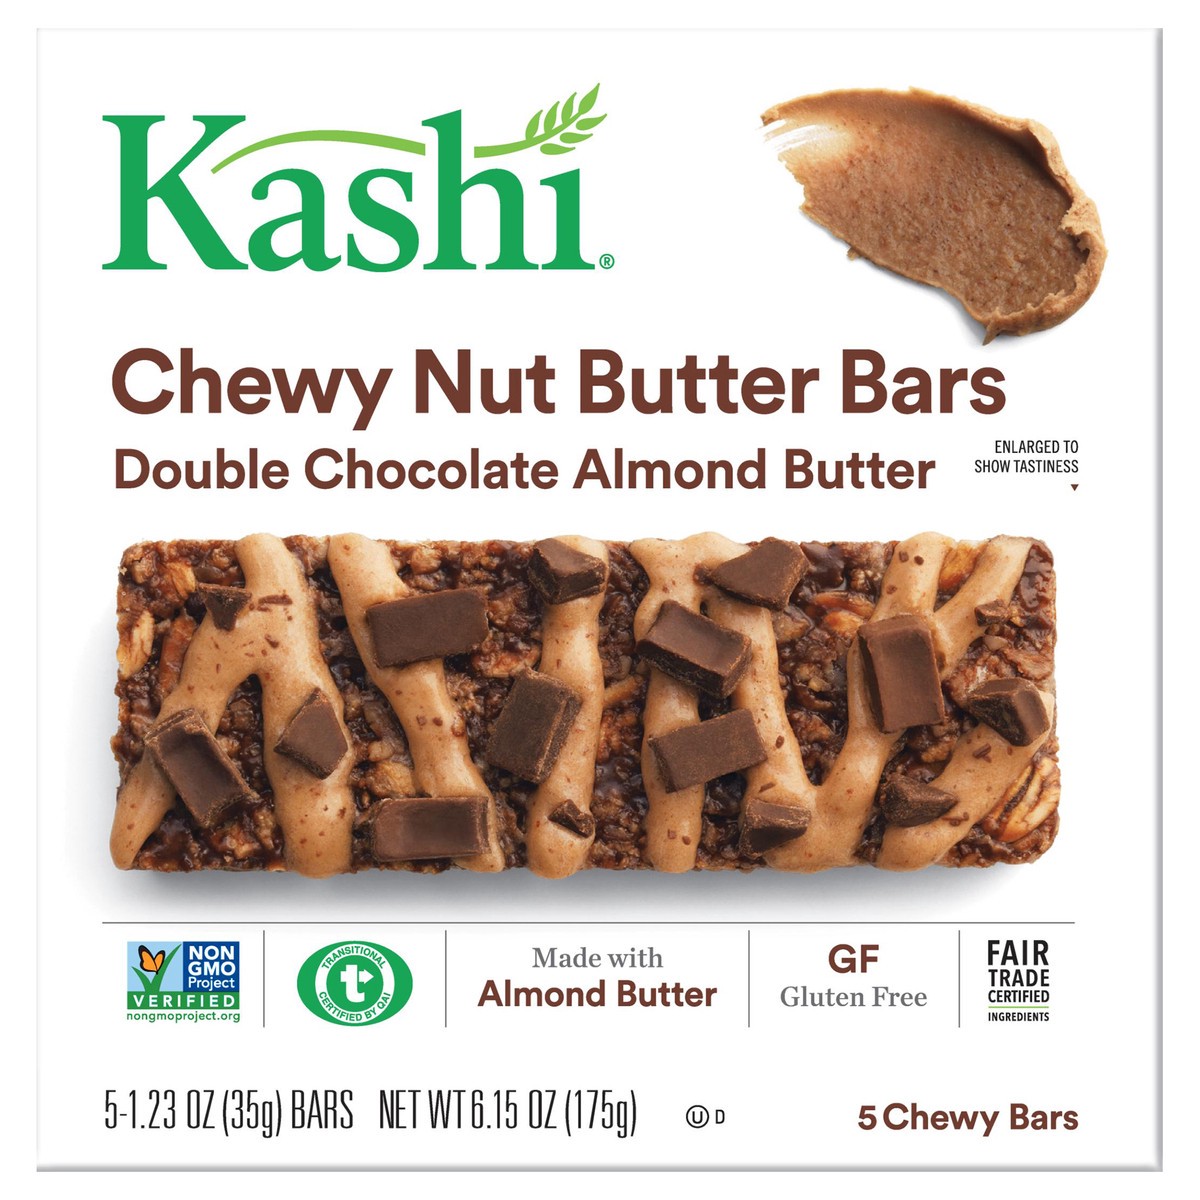 slide 10 of 10, Kashi Double Chocolate Almond Butter Chewy But Bars, 5 ct; 1.23 oz